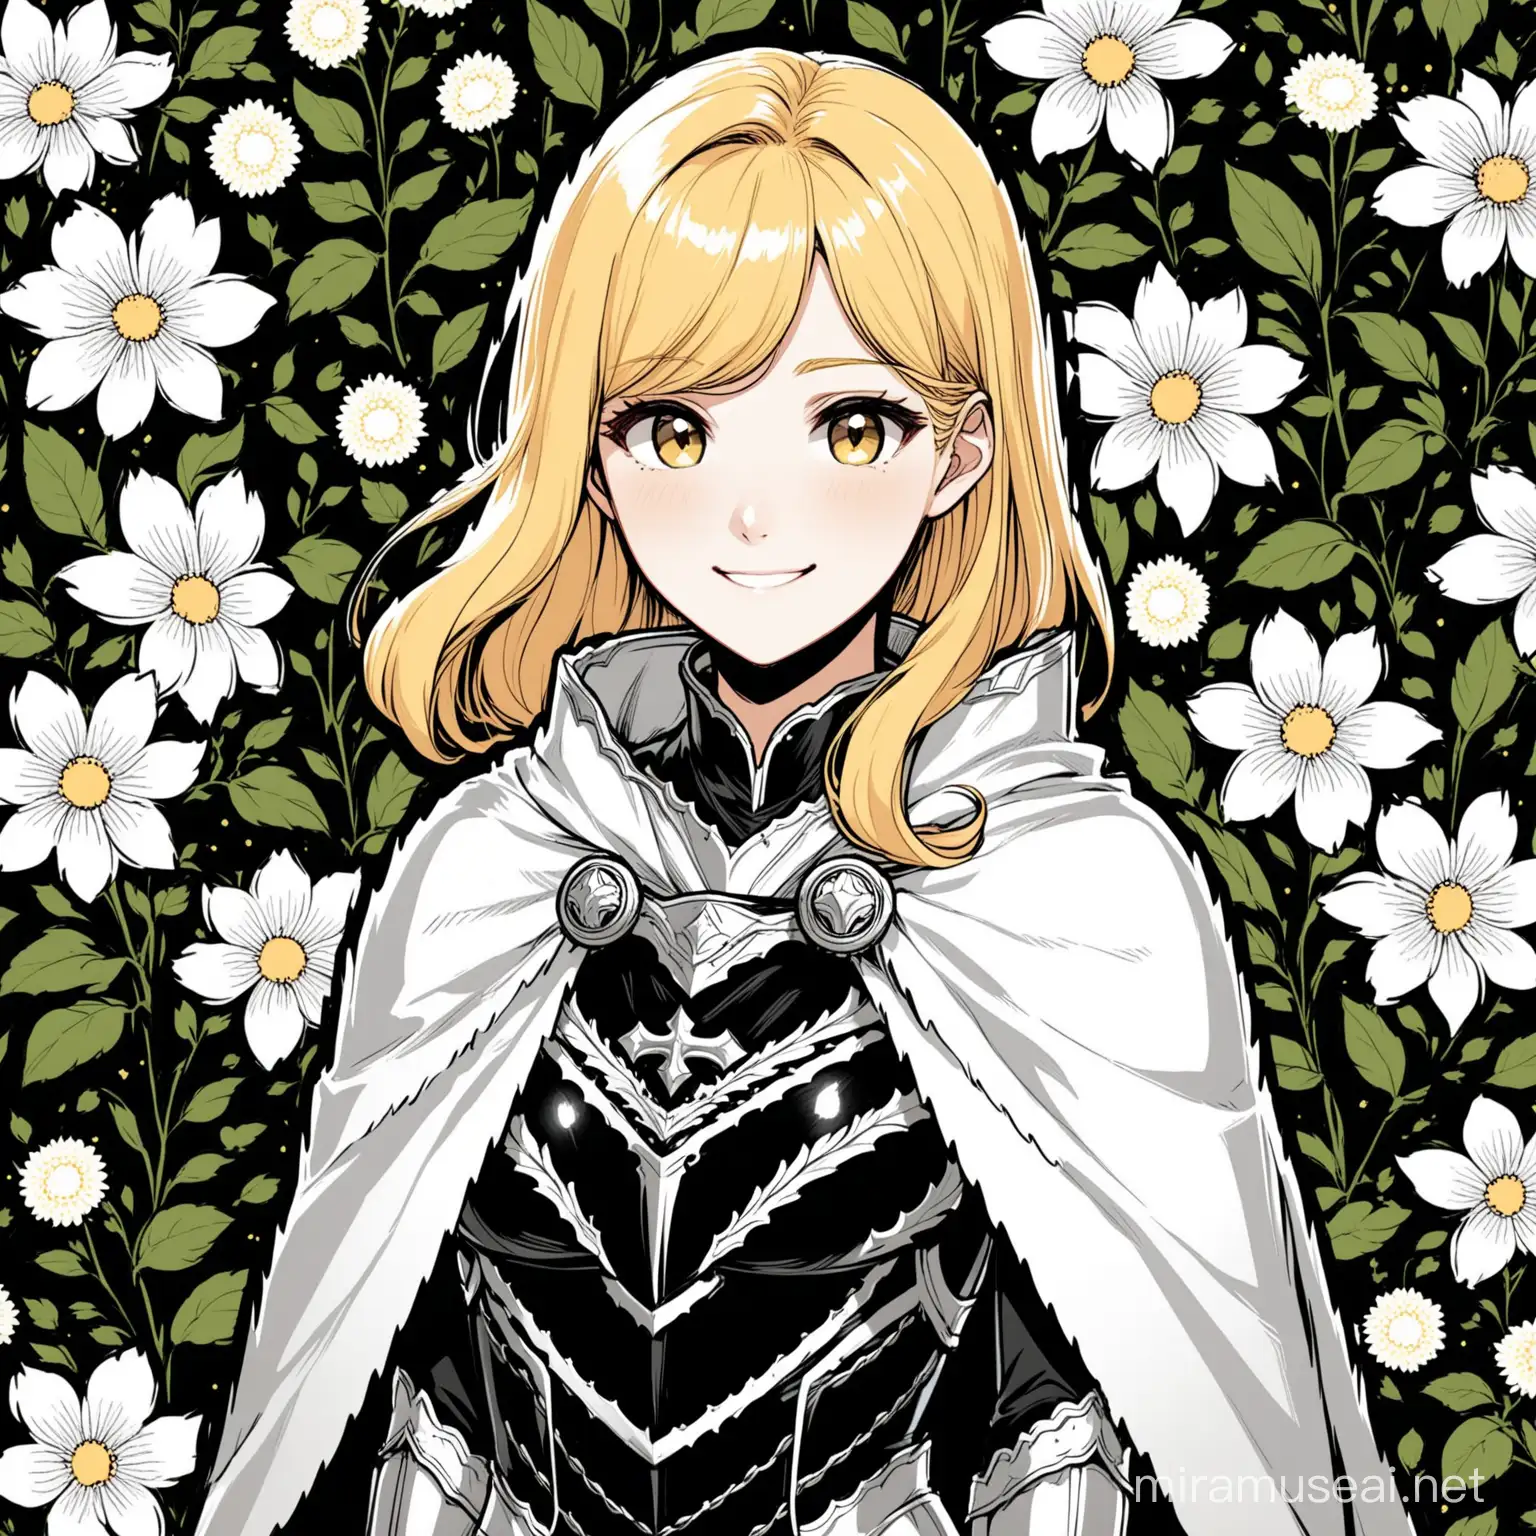 Blonde Woman in Light Armor with Black and White Floral Background Korean Webtoon Style